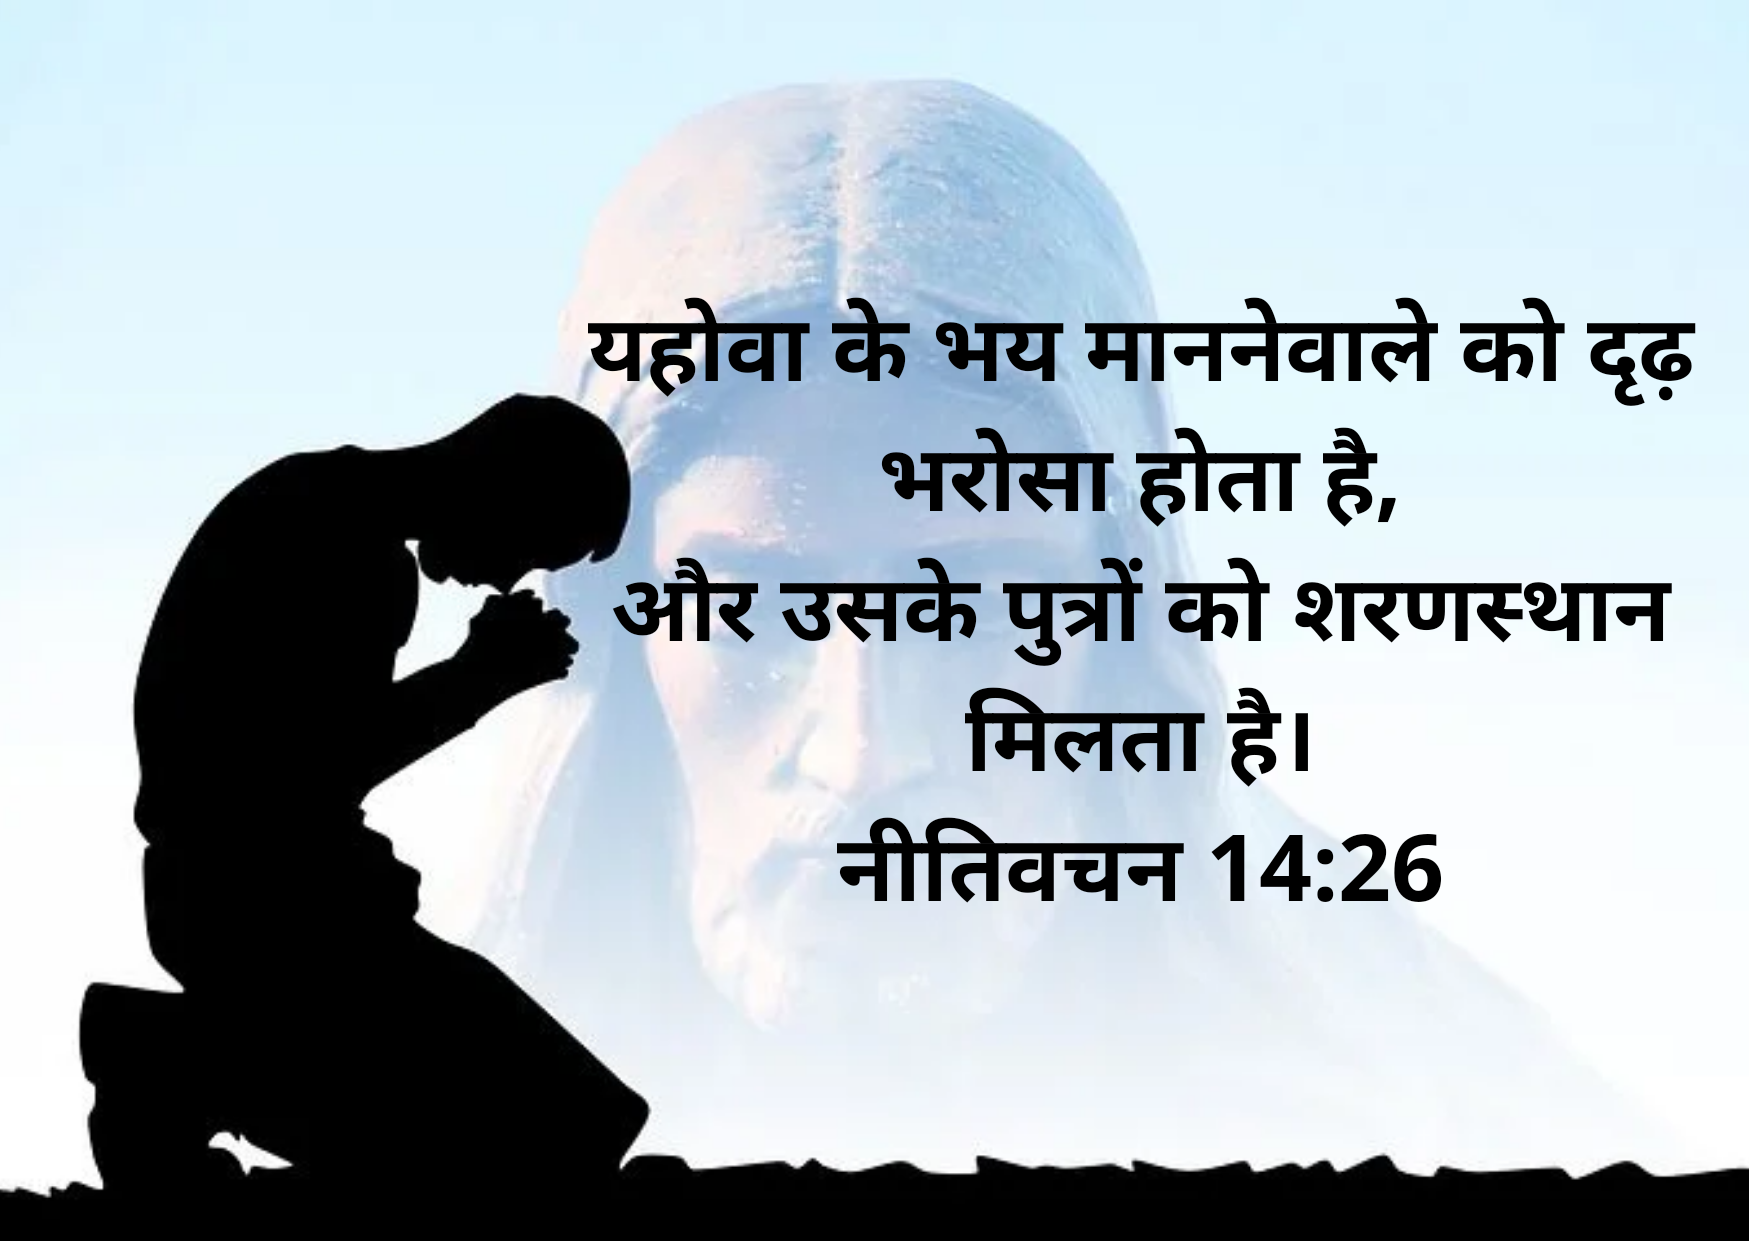 Bible verses in Hindi images, quotes, Inspirational words,